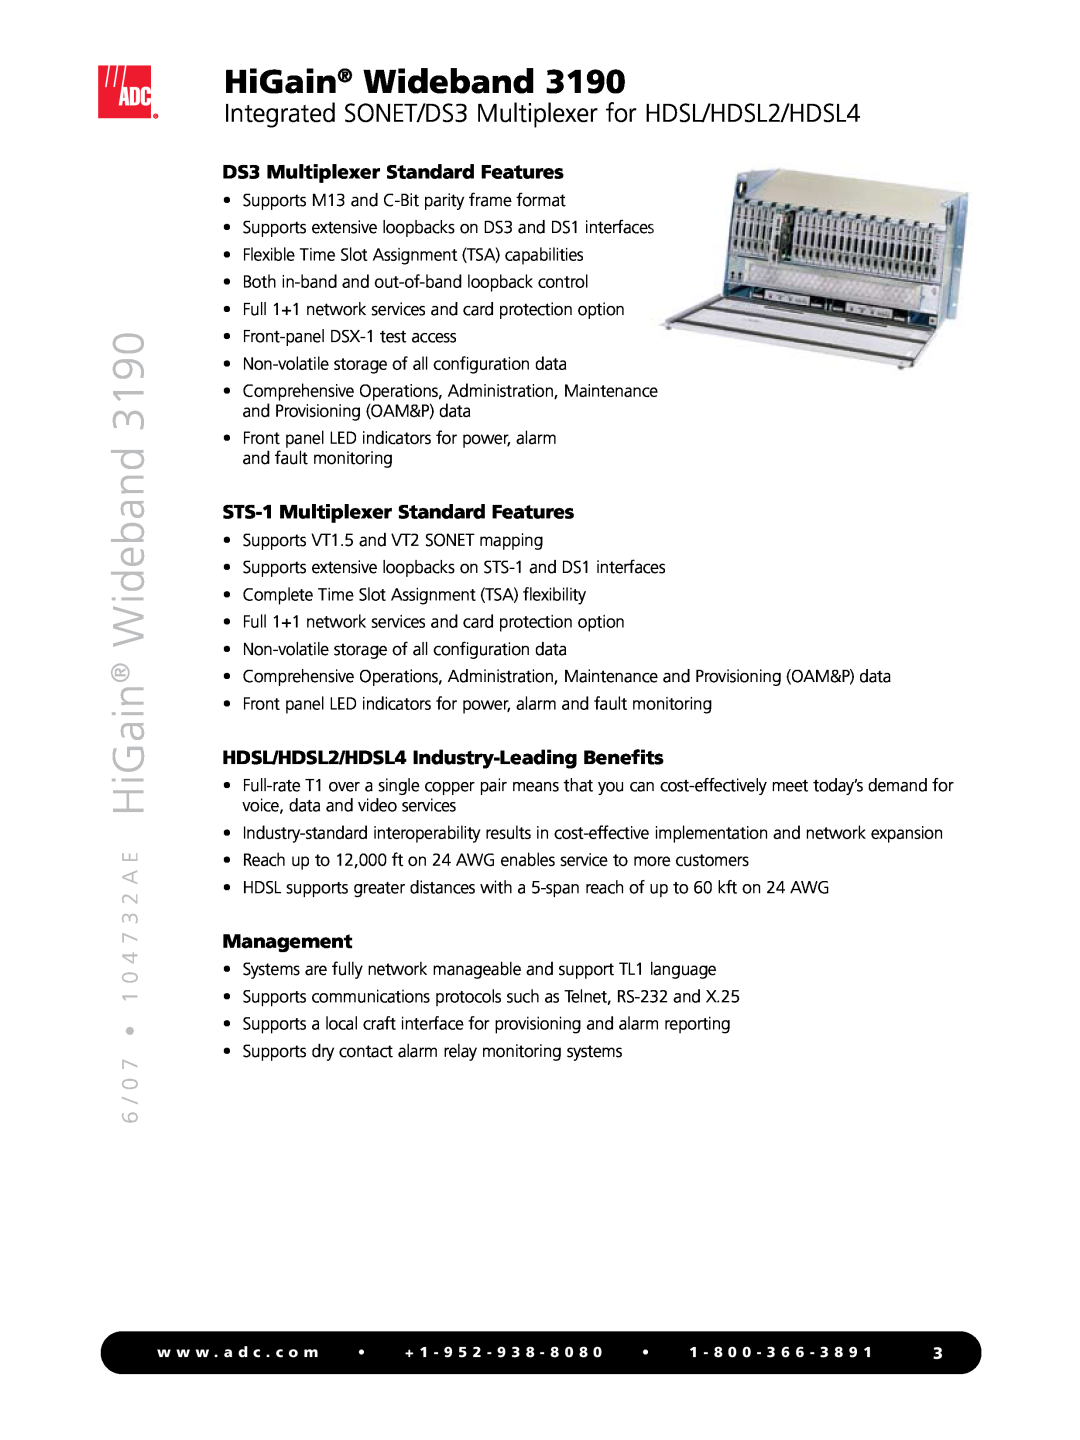 ADC WBS-3190 manual 6 / 0 7 1 0 4 7 3 2 A E HiGain Wideband, DS3 Multiplexer Standard Features, Management 